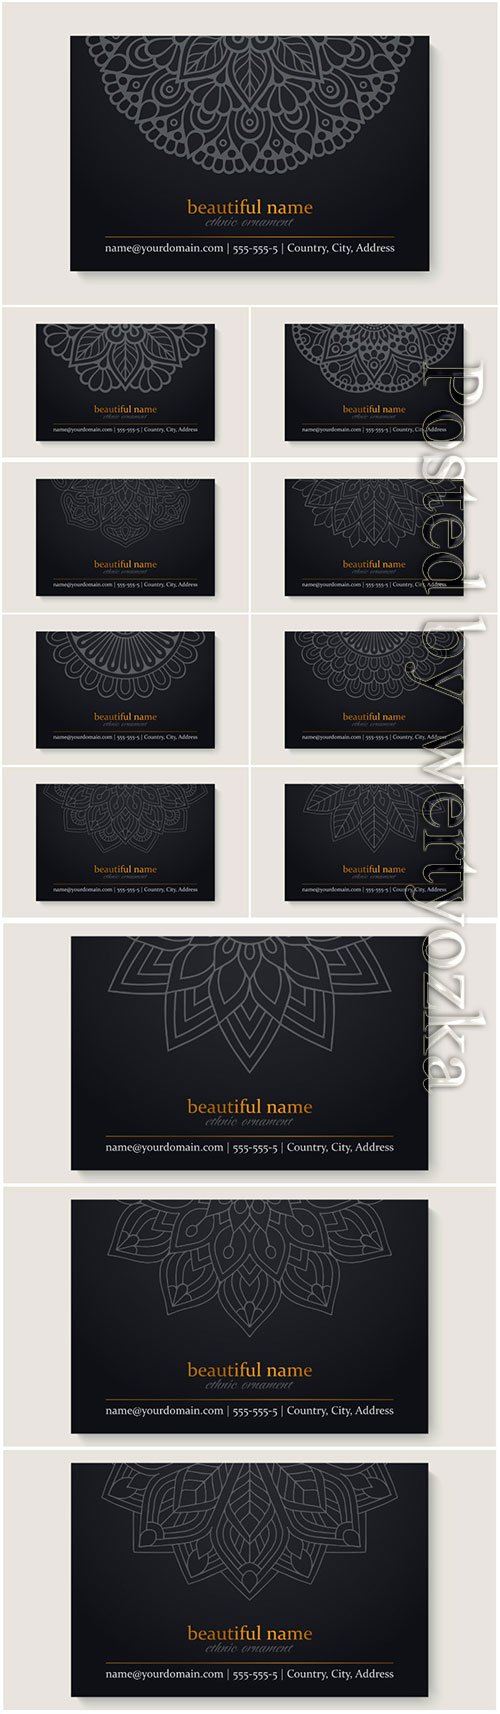 Business card template with ethnic mandala design